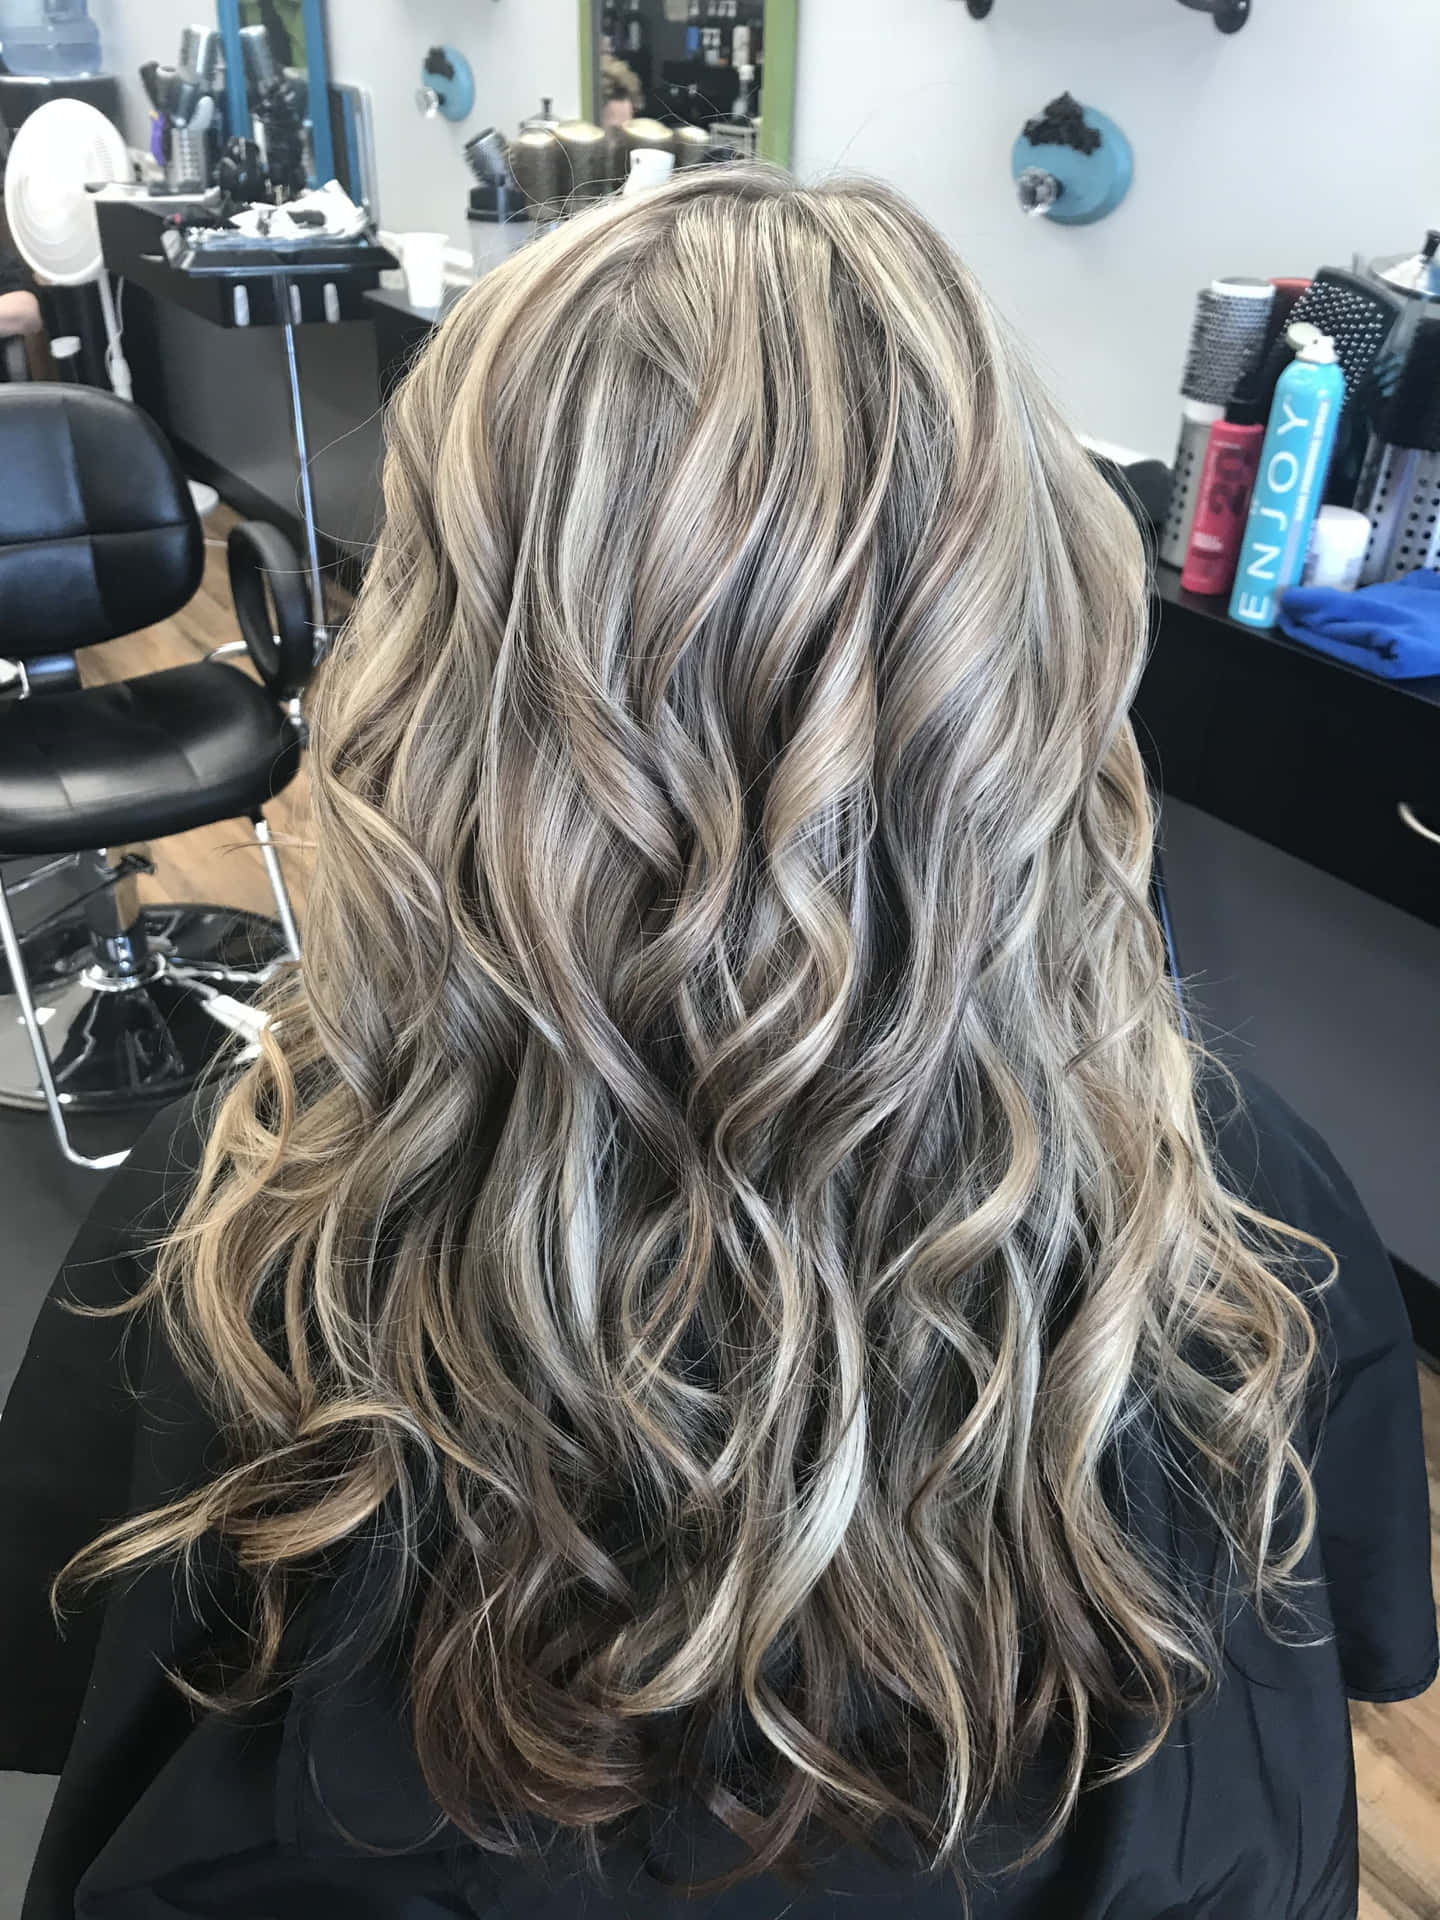 A Woman's Hair In A Salon With Blonde Highlights